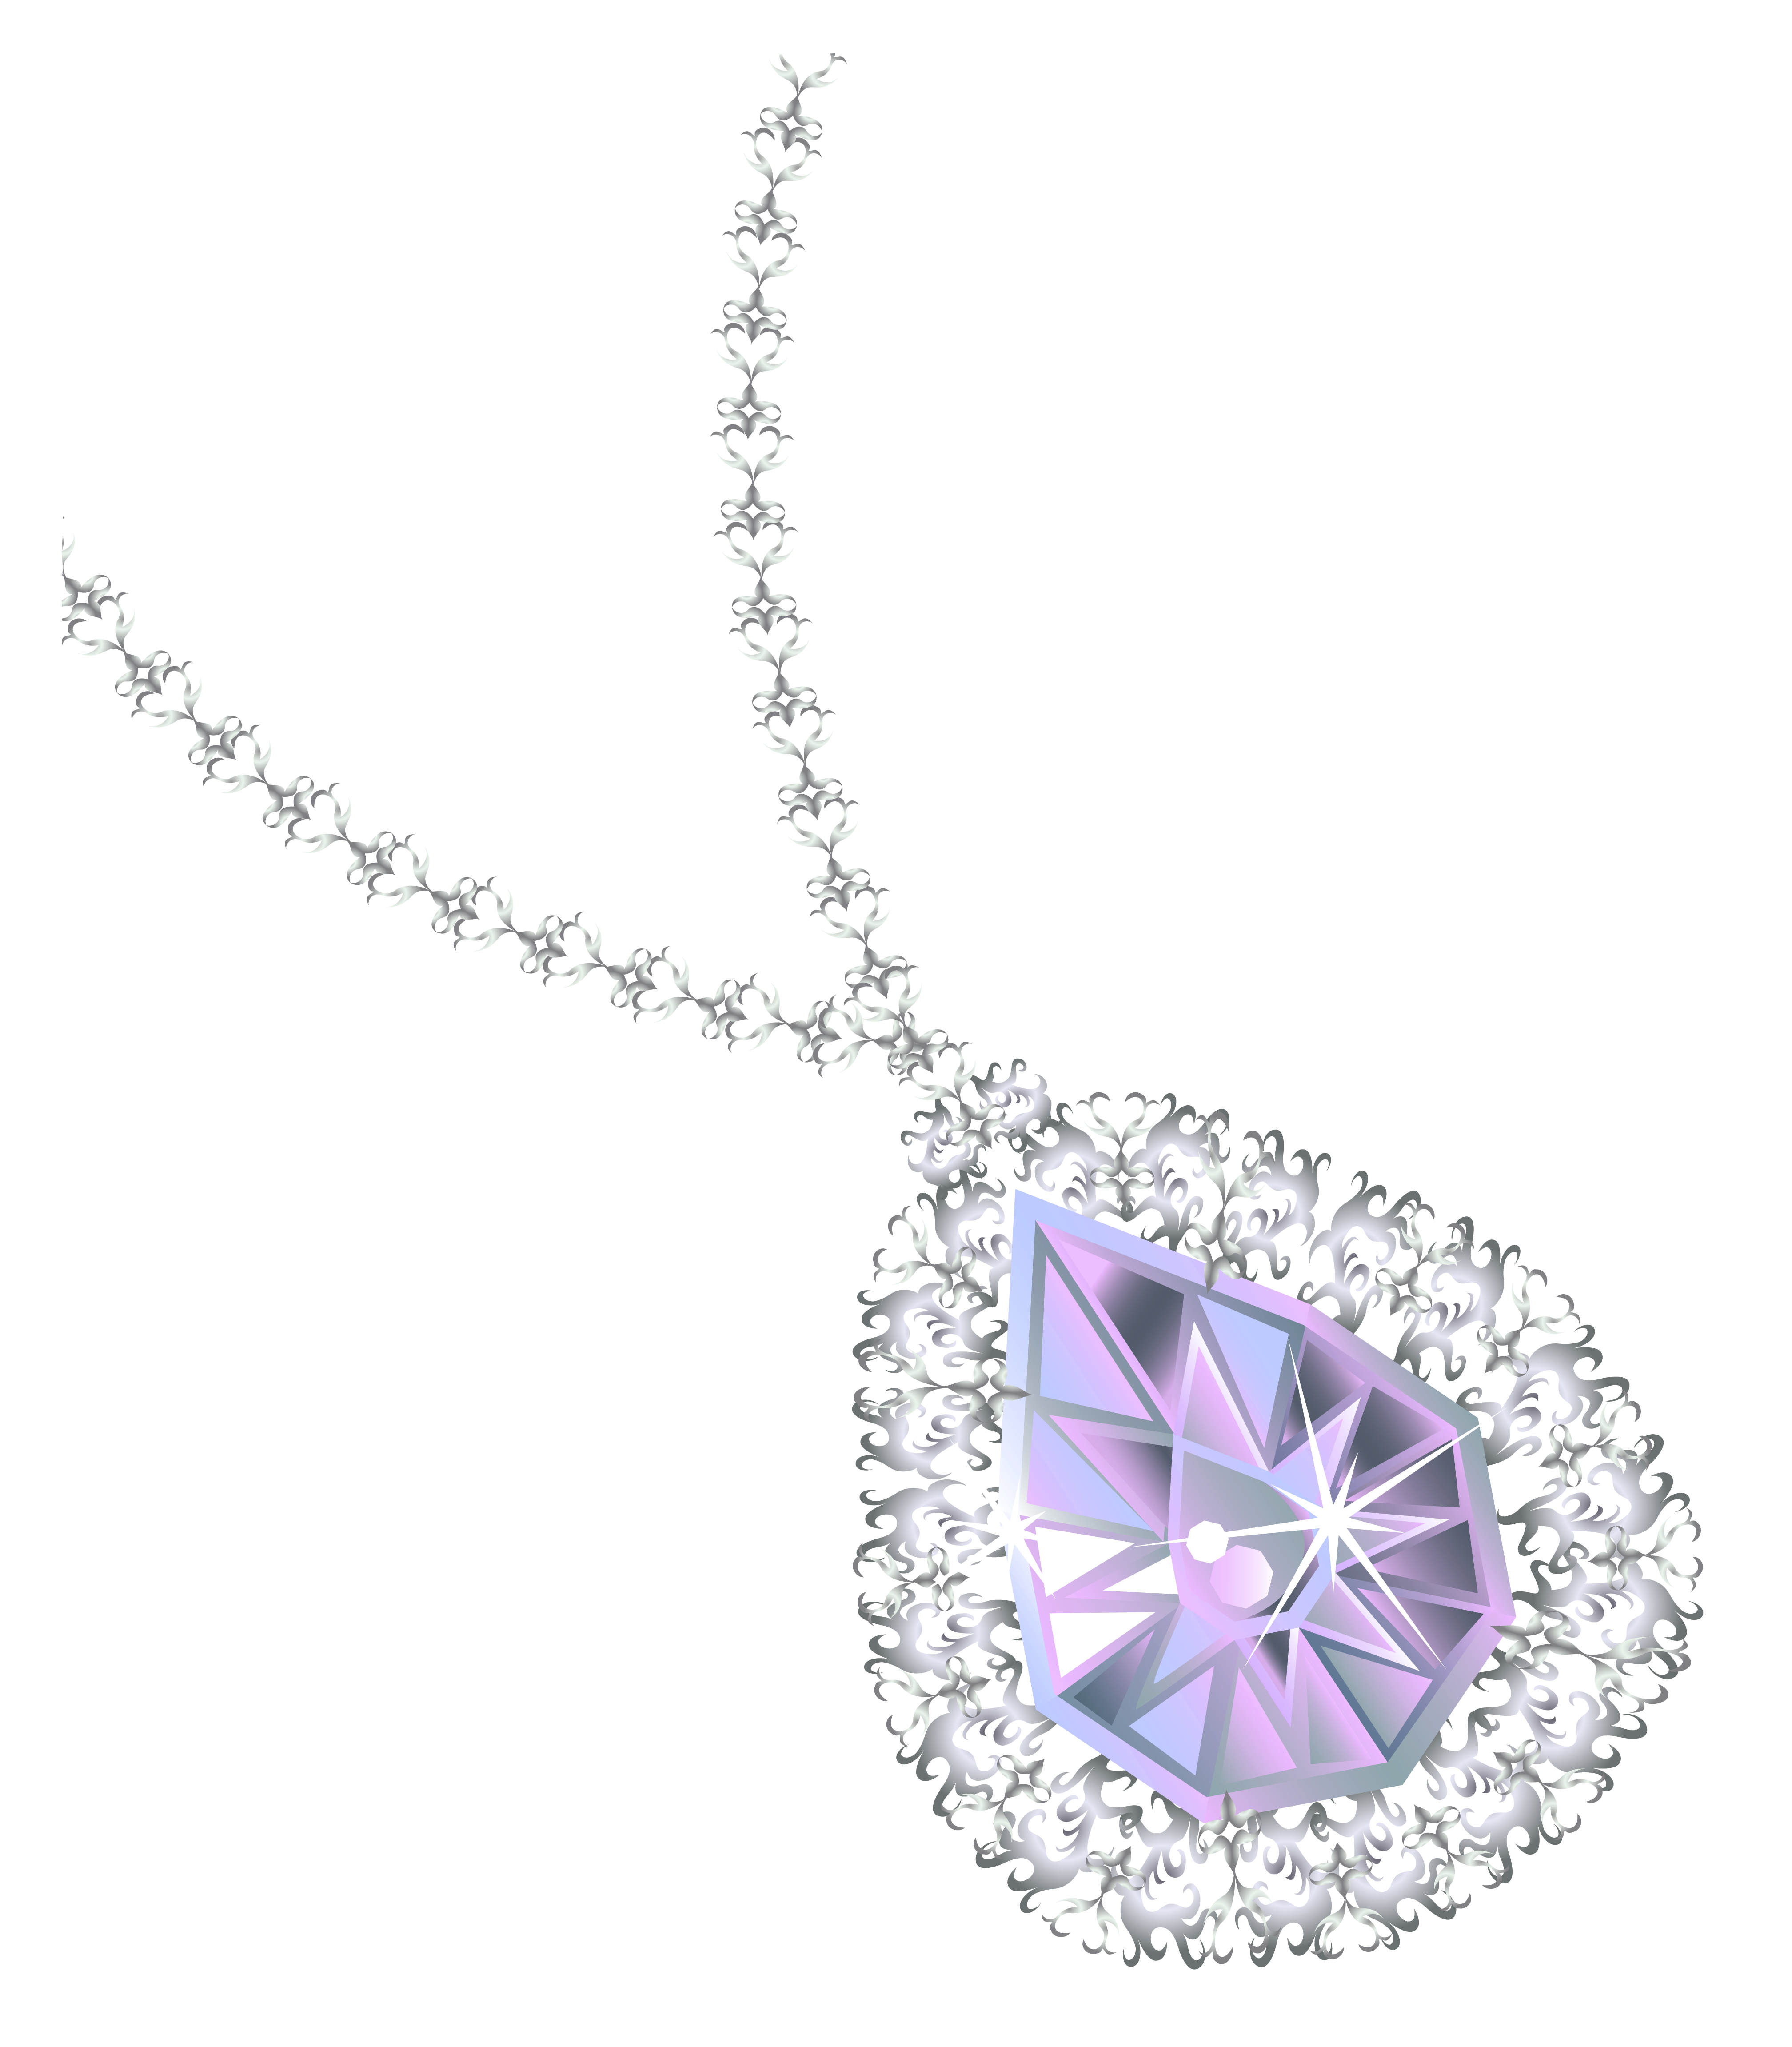 Diamond necklace png.